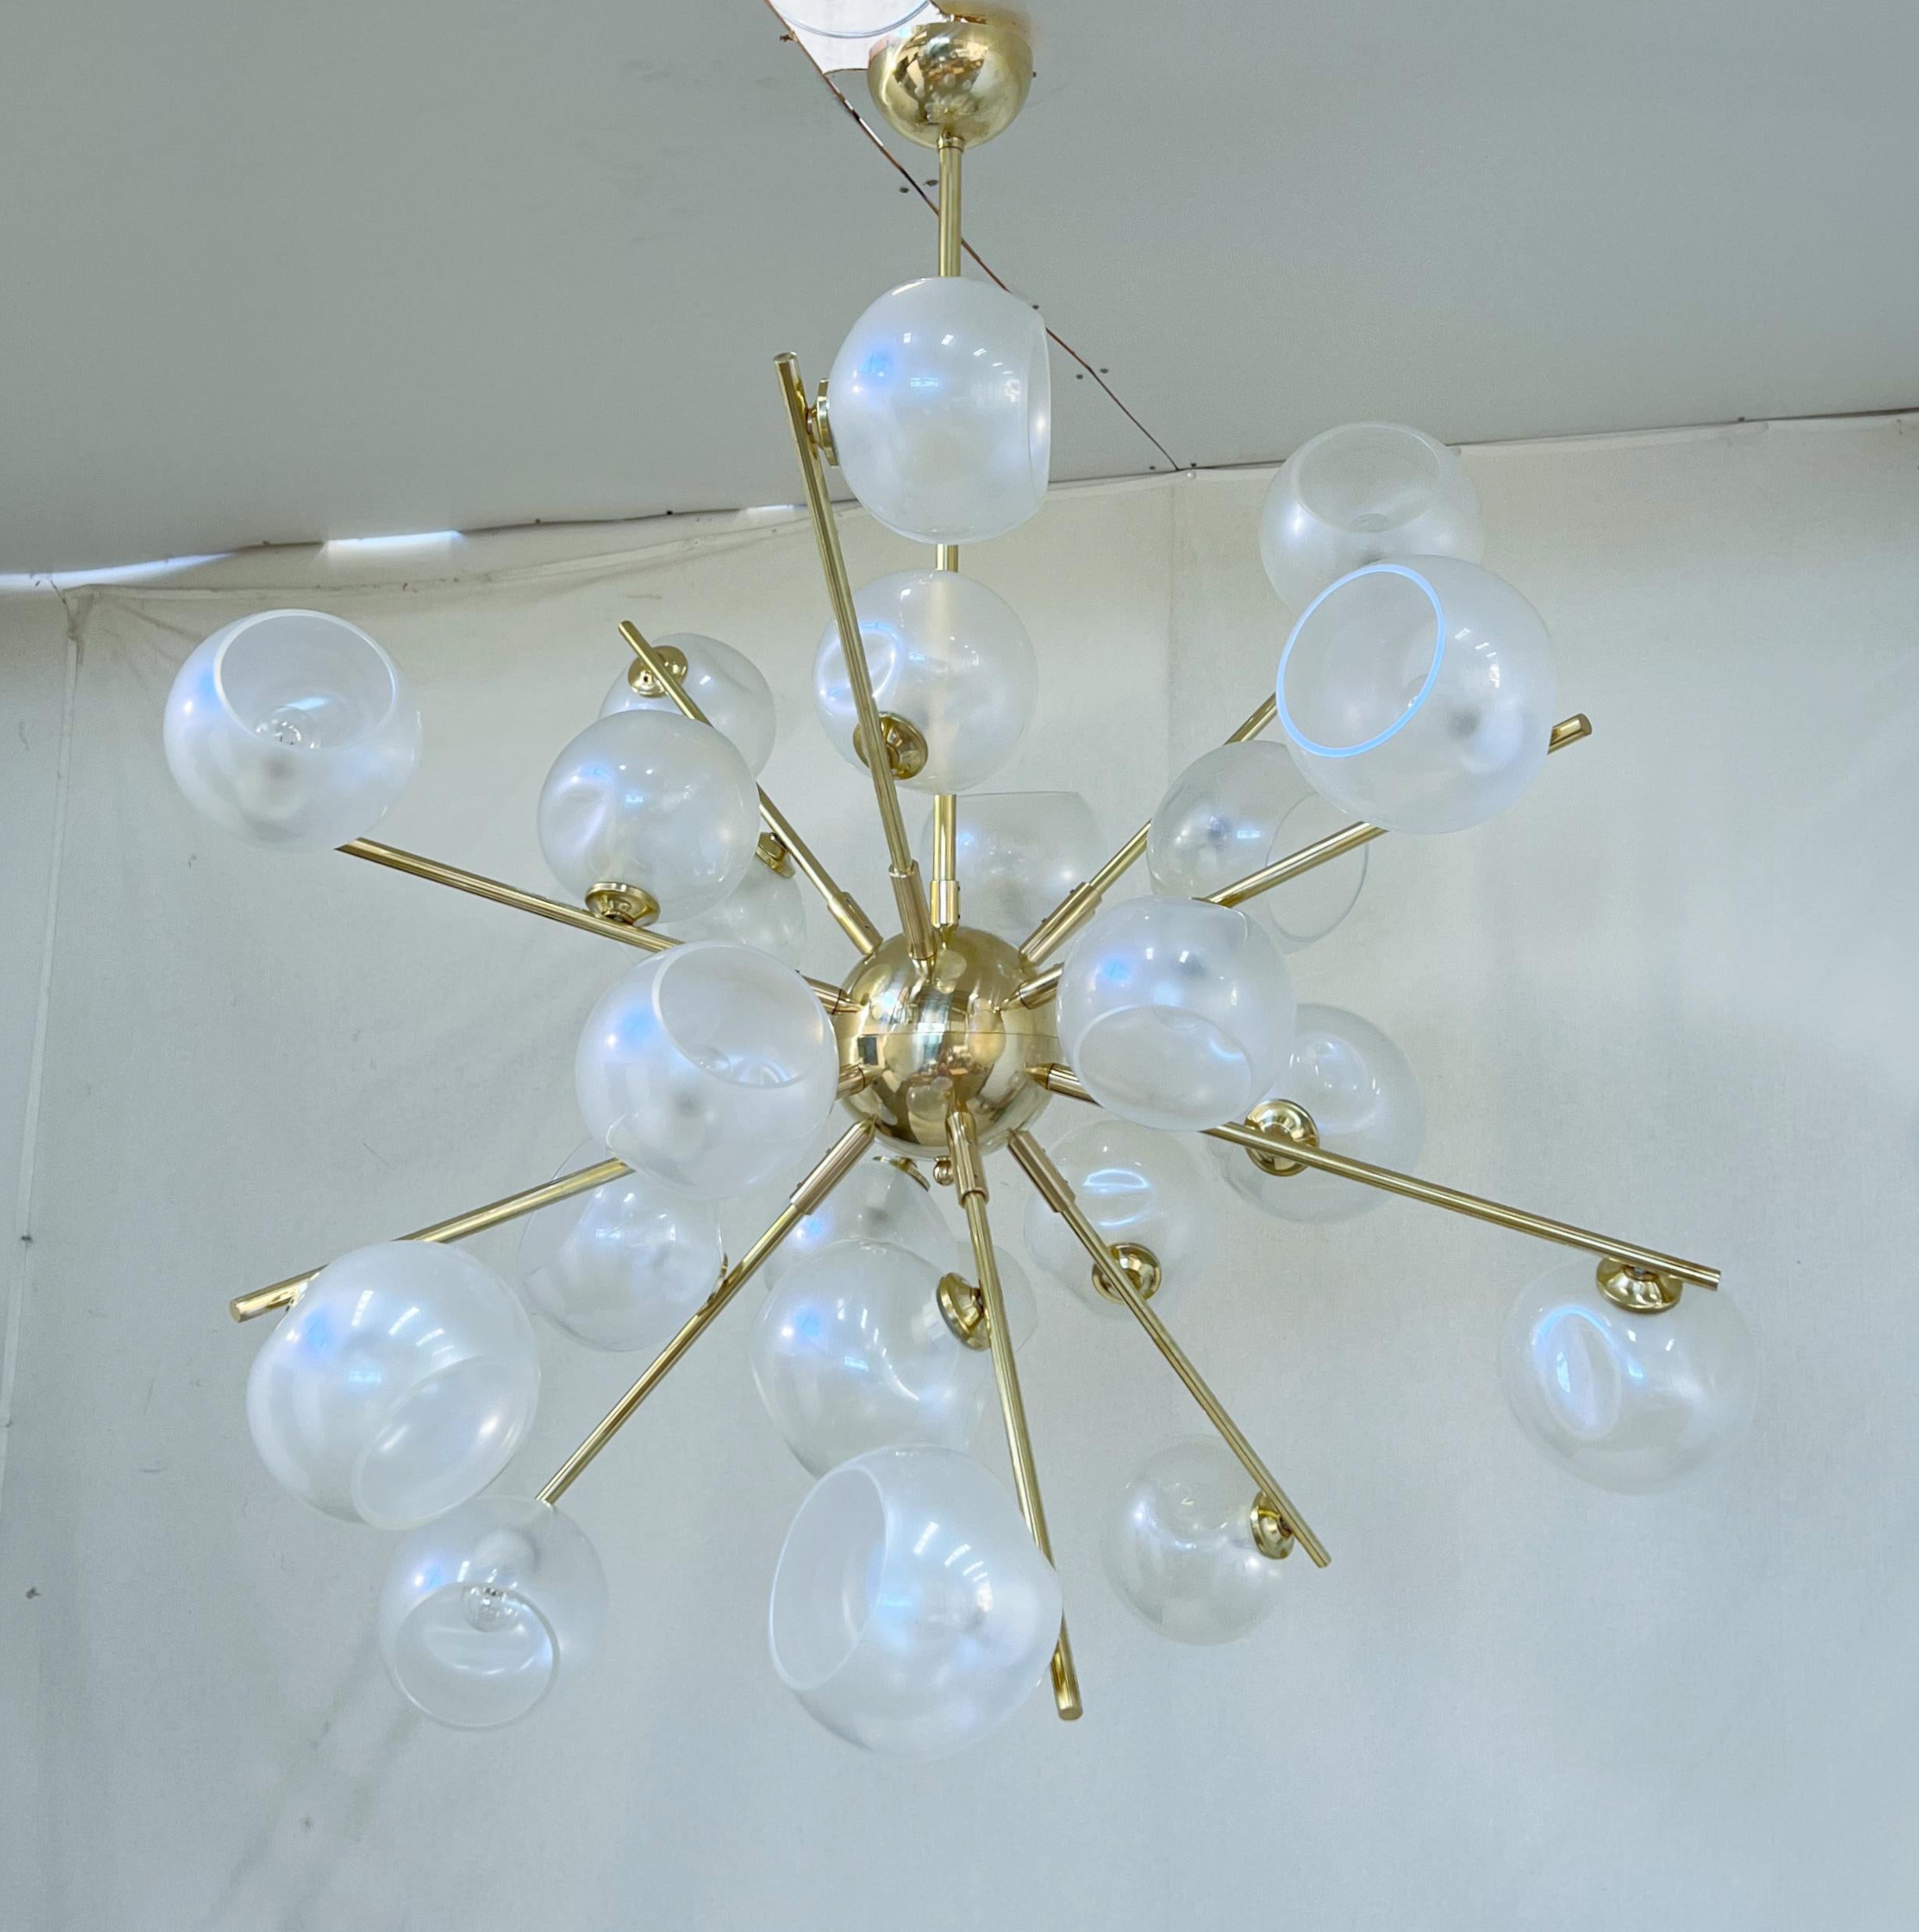 Italian modern sputnik chandelier with opaline Murano glass shades mounted on unlacquered natural brass frame / Made in Italy
24 lights / E12 or E14 type / max 40W each
Measures: Diameter 39 inches / Height 39 inches plus rod and canopy
Order